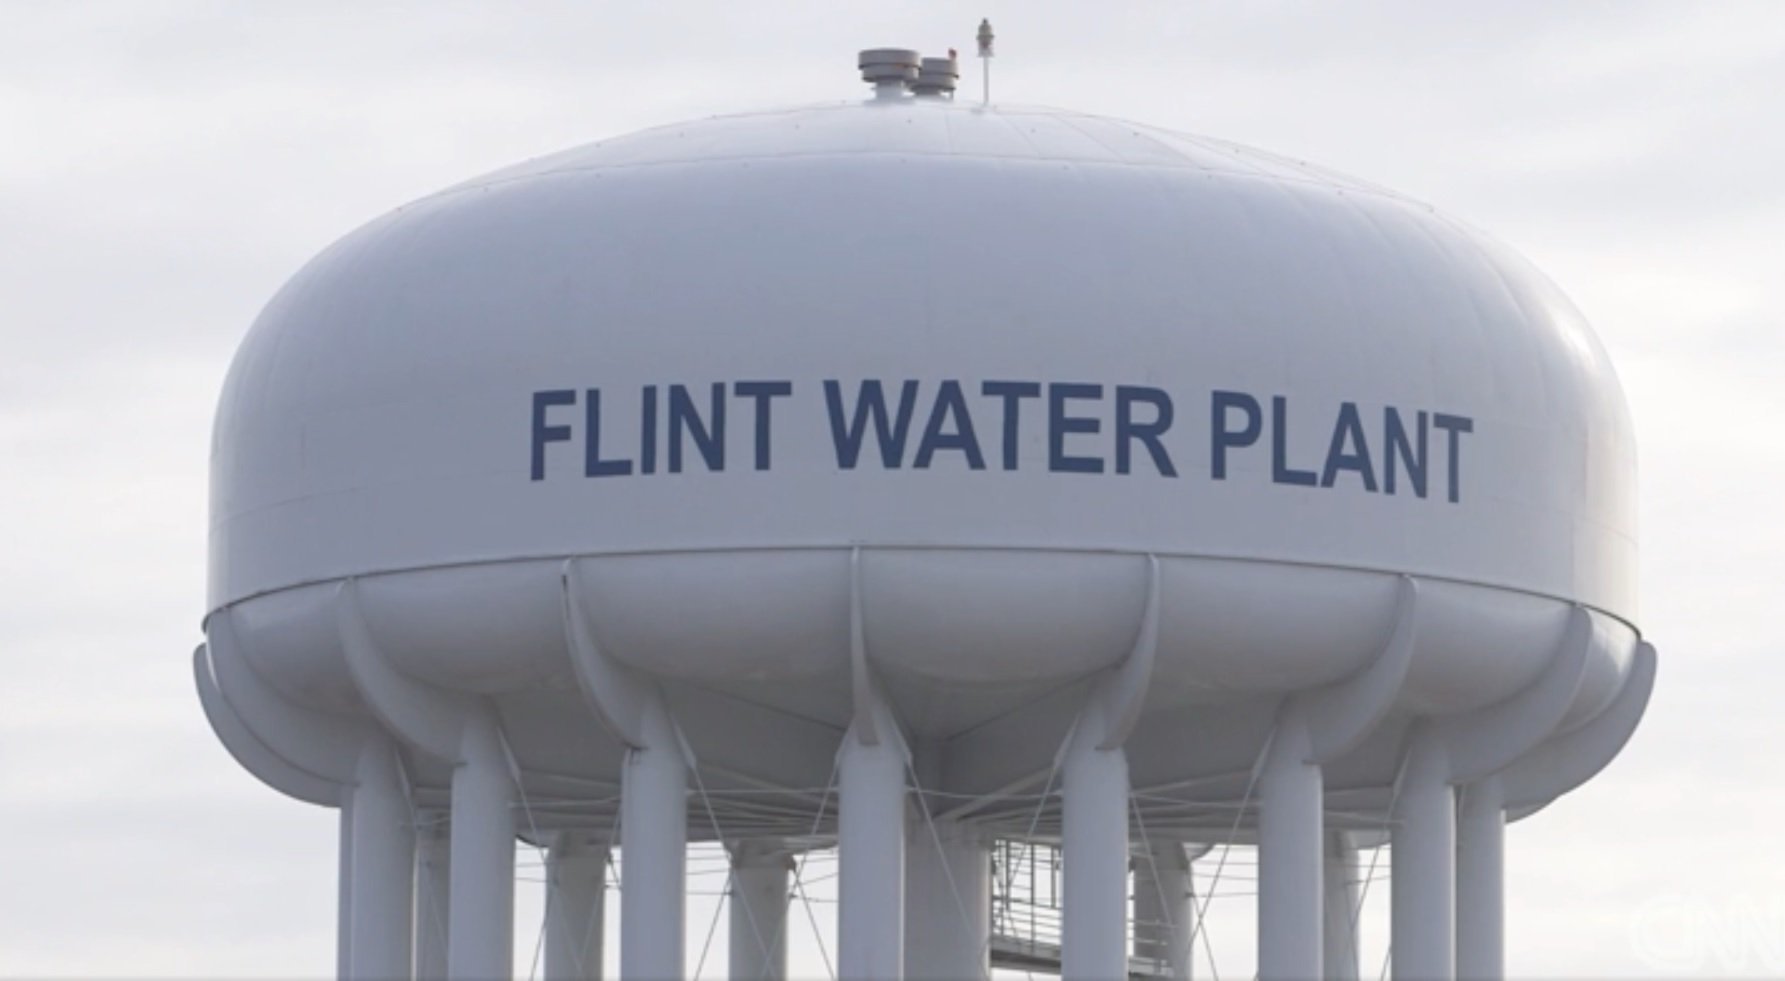 Emails Shows Contractor Was Concerned About Lead In Flint’s Water - CBS Pittsburgh